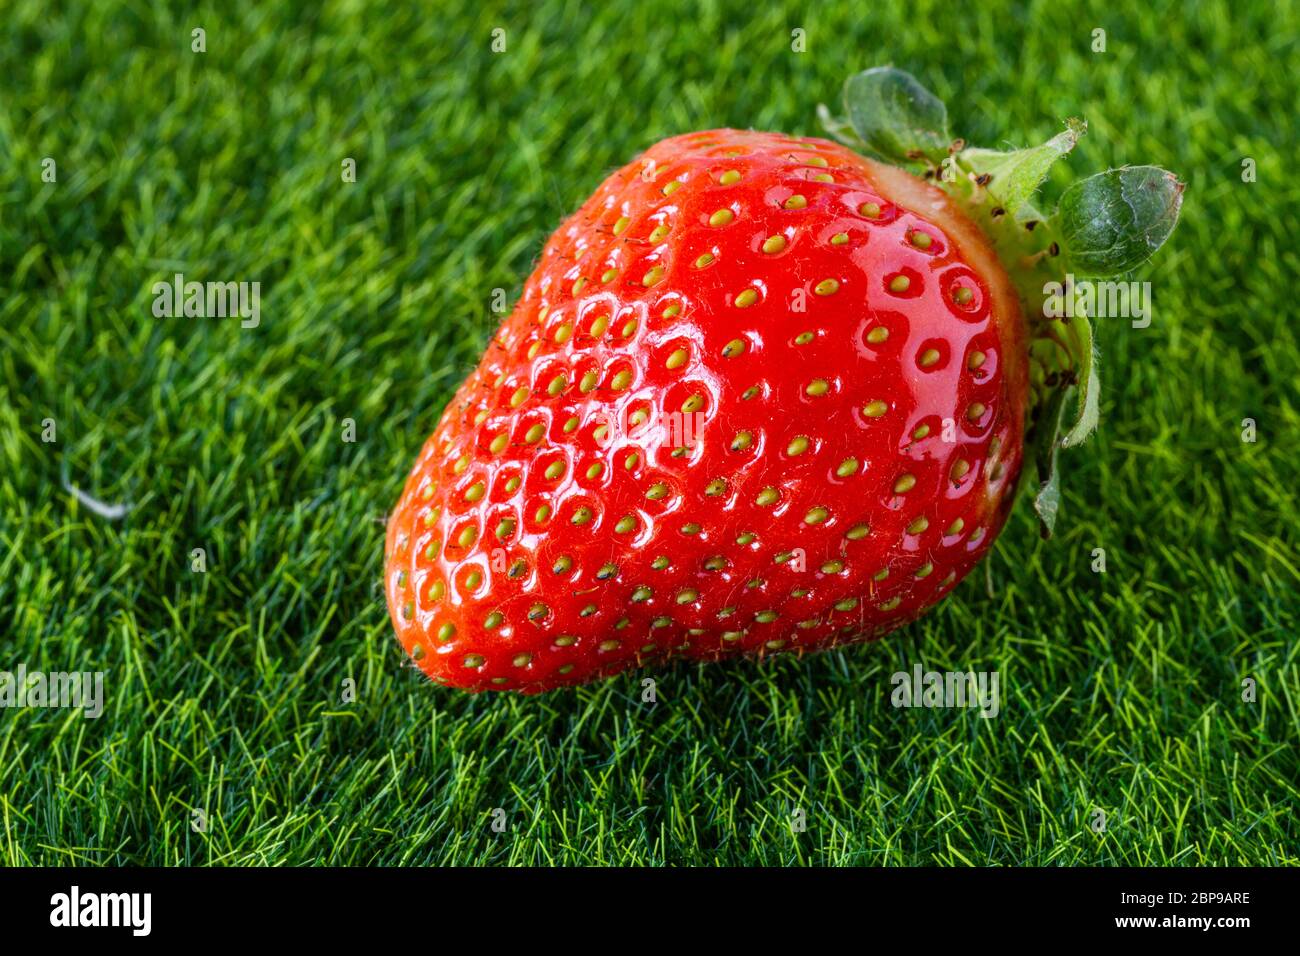 Strawberries on a green background. Red, seasonal fruit. Strawberries on the grass. Fruit for dessert. Juicy and sweet. Strawberries from the garden. Stock Photo